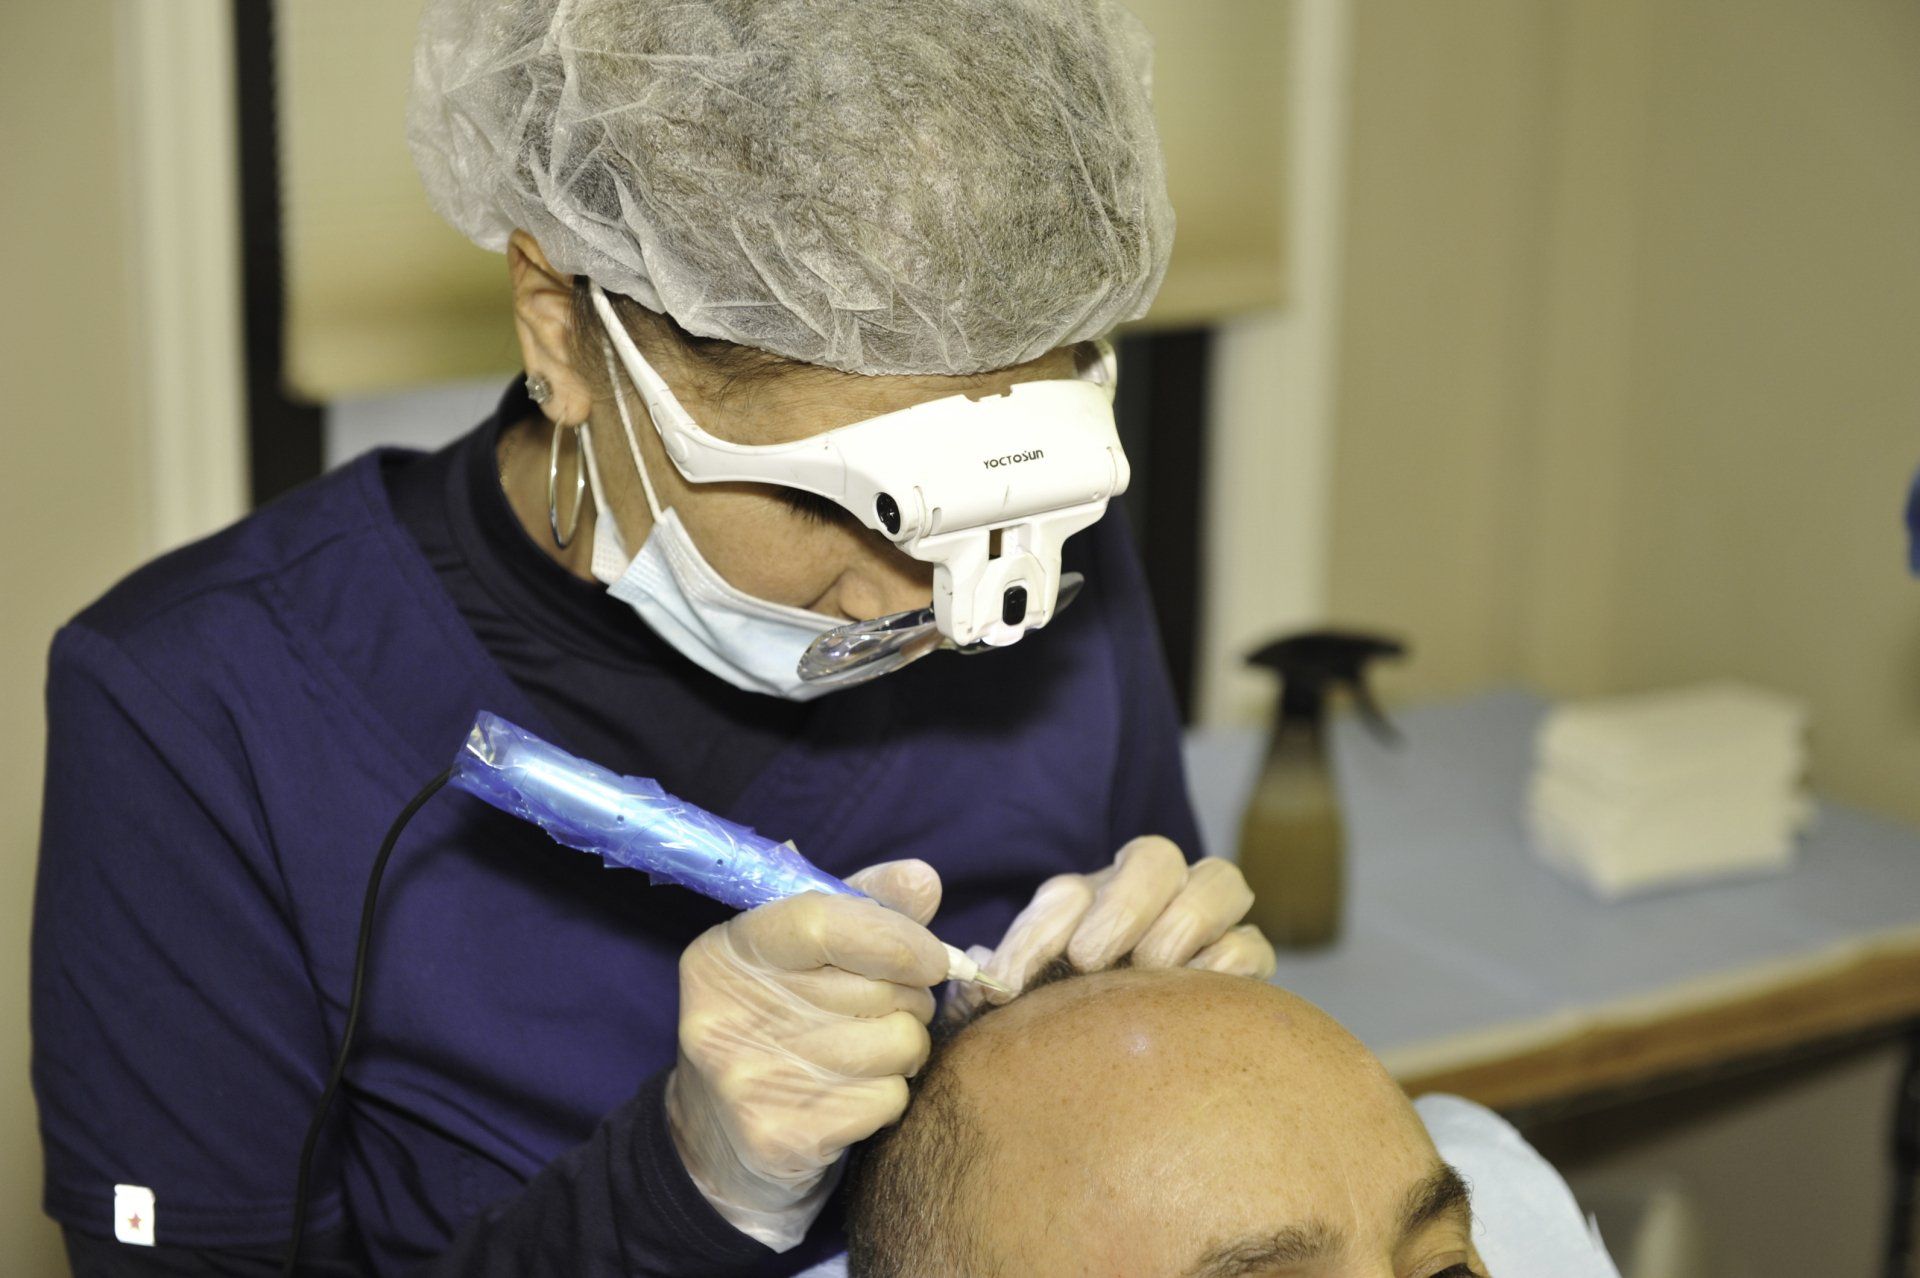 Man getting hair replacement service also known as scalp micropigmentation